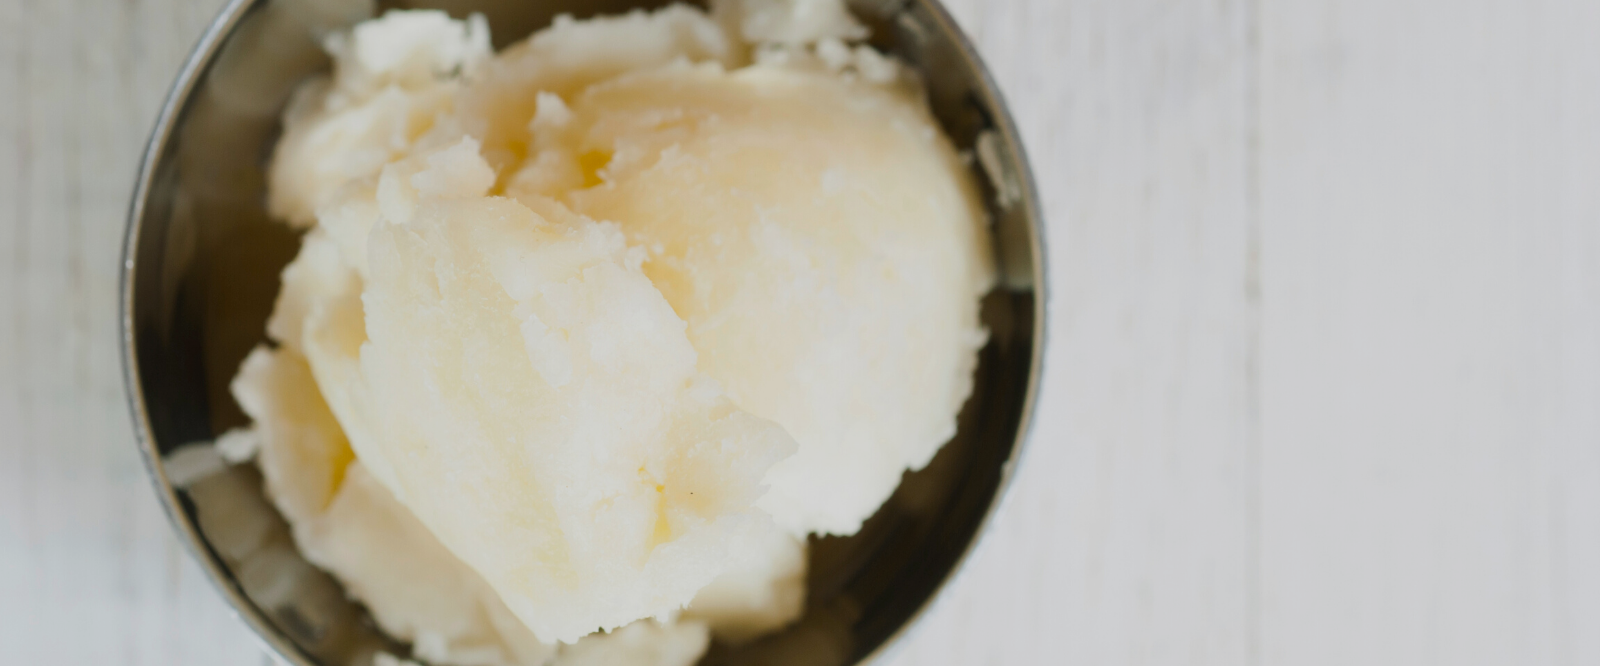 5 benefits of shea butter: Why it can be magical for the skin